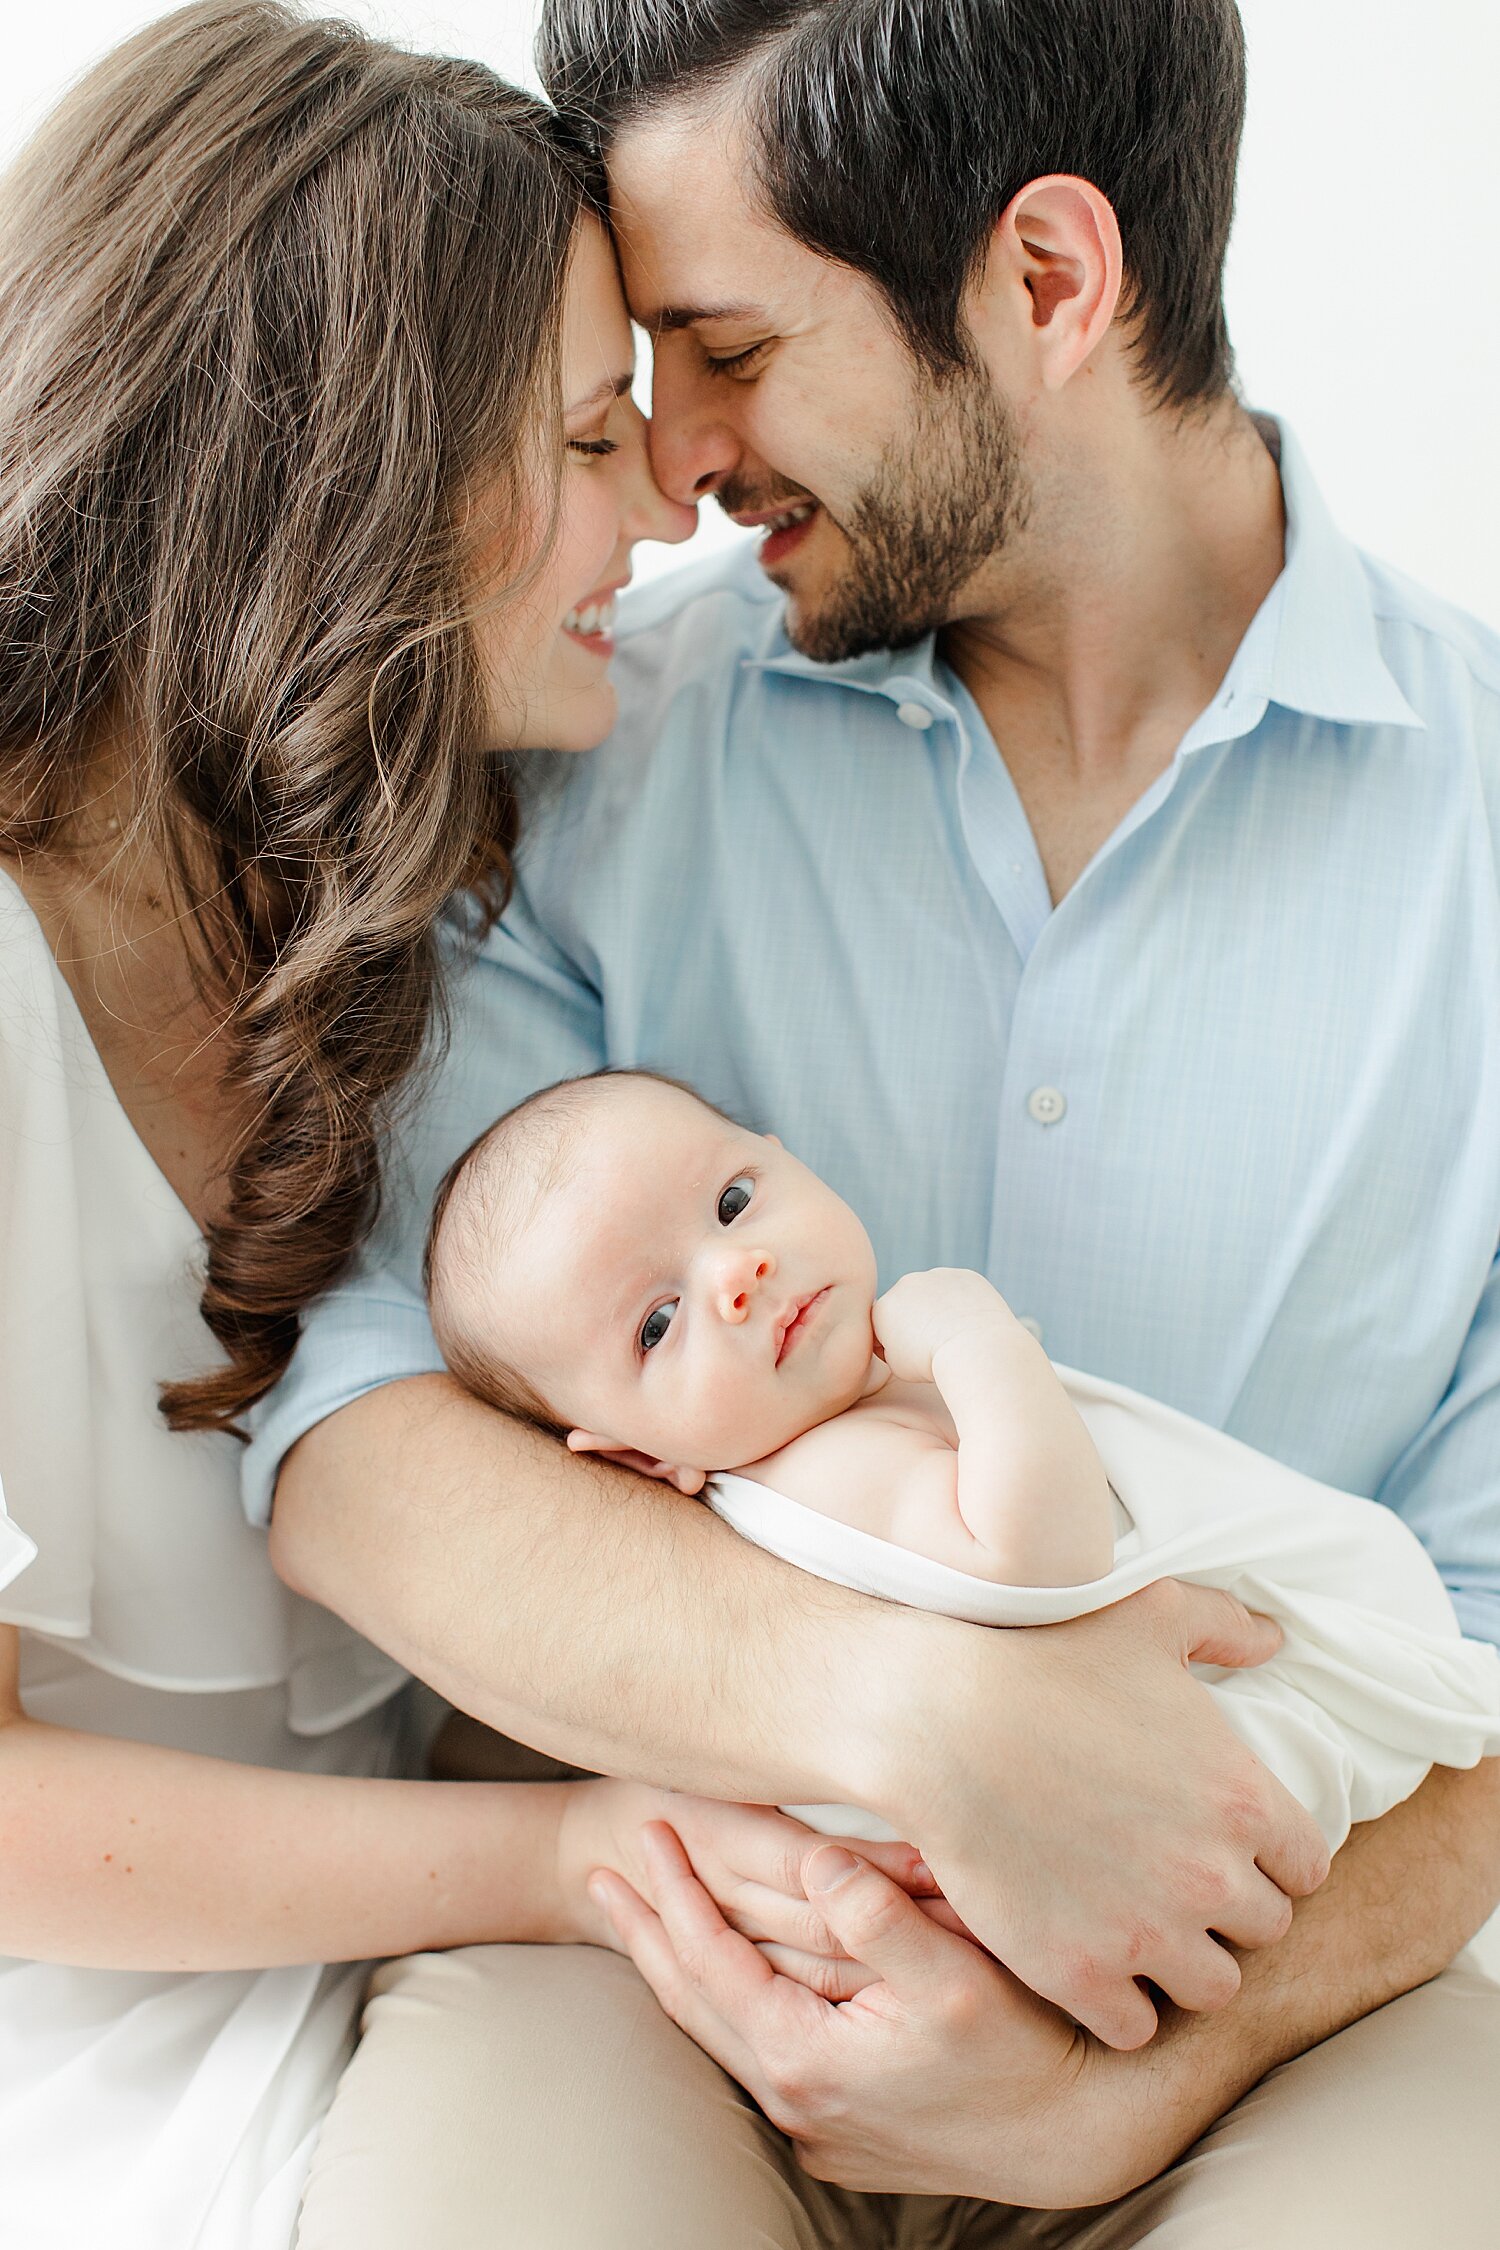 Mom and Dad looking at each other while holding their baby boy. Photos by Kristin Wood Photography.